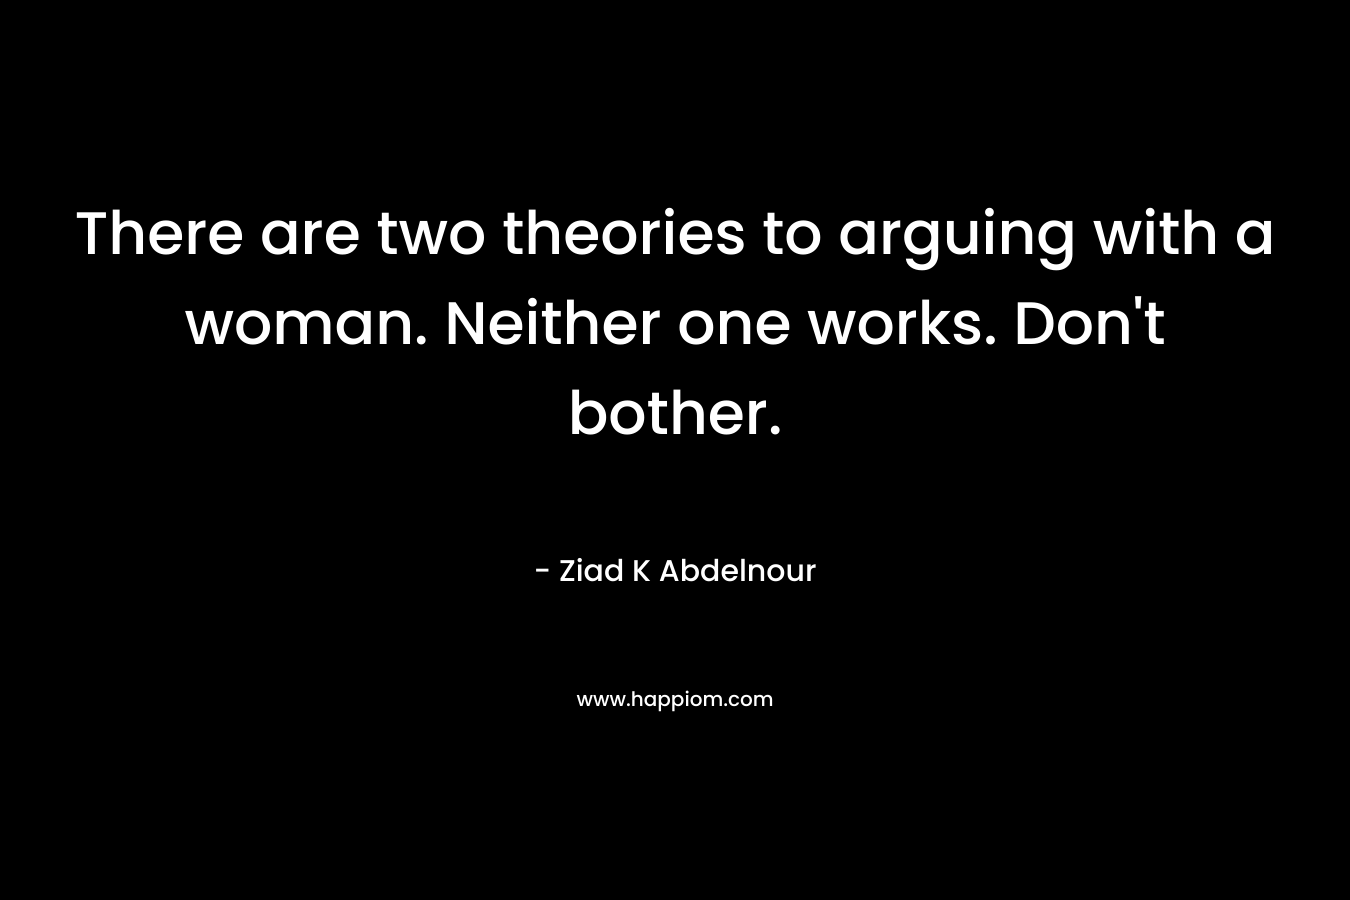 There are two theories to arguing with a woman. Neither one works. Don’t bother. – Ziad K Abdelnour